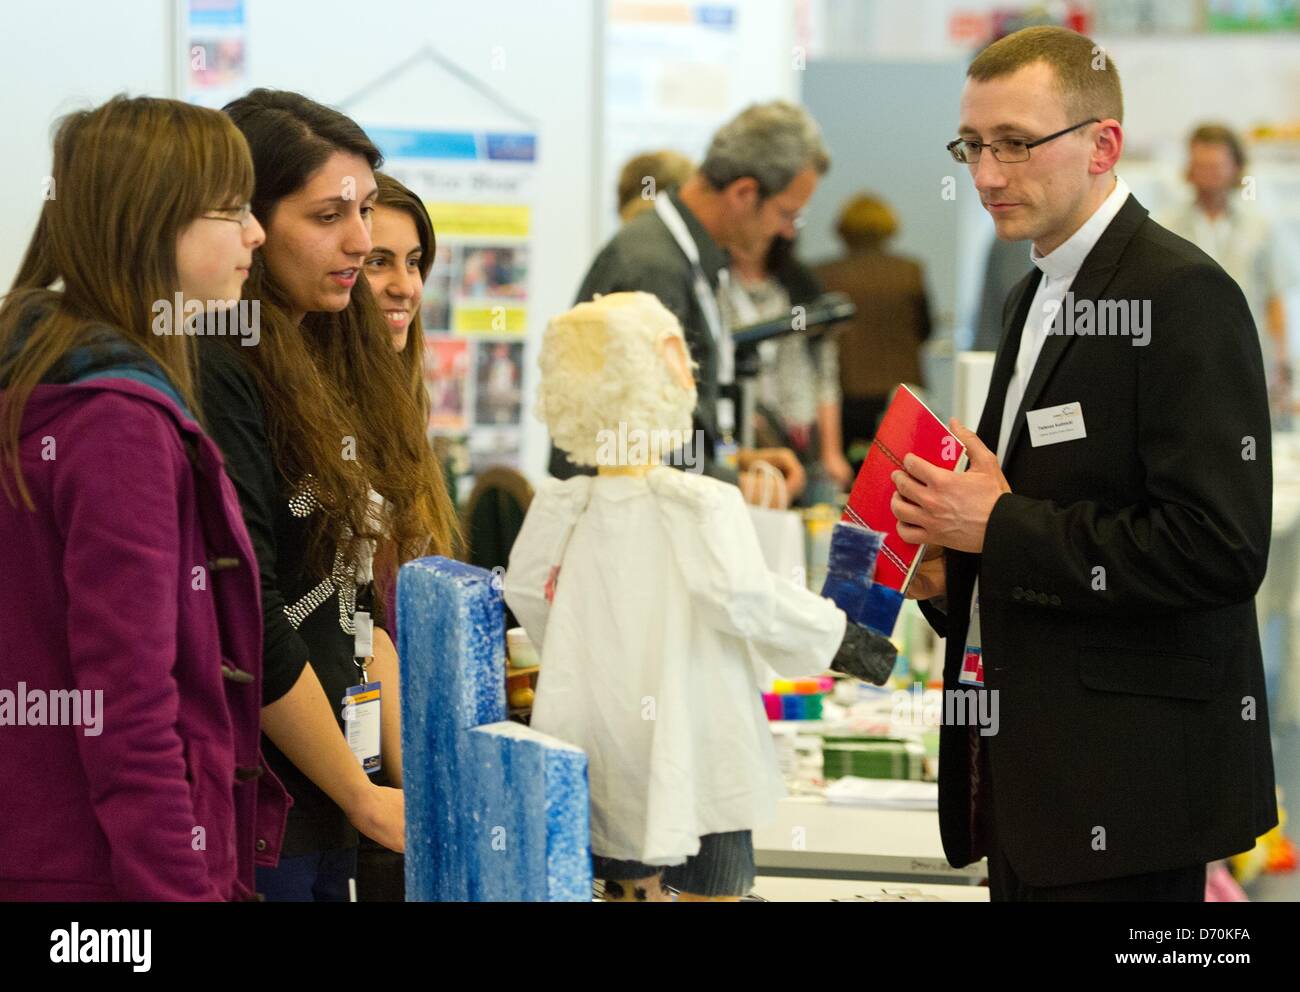 Participants from Bulgaria talk with each other during the opening event for the international education festival at the Collegium Polonicum on the German-Polish border in Slubice, Poland, 25 April 2013. Around 350 teachers will discuss teaching methods and experiments at the four-day conference at the Viadrina European University in Frankfurt Oder, Germany, and the Collegium Polonicum. Photo: Patrick Pleul Stock Photo